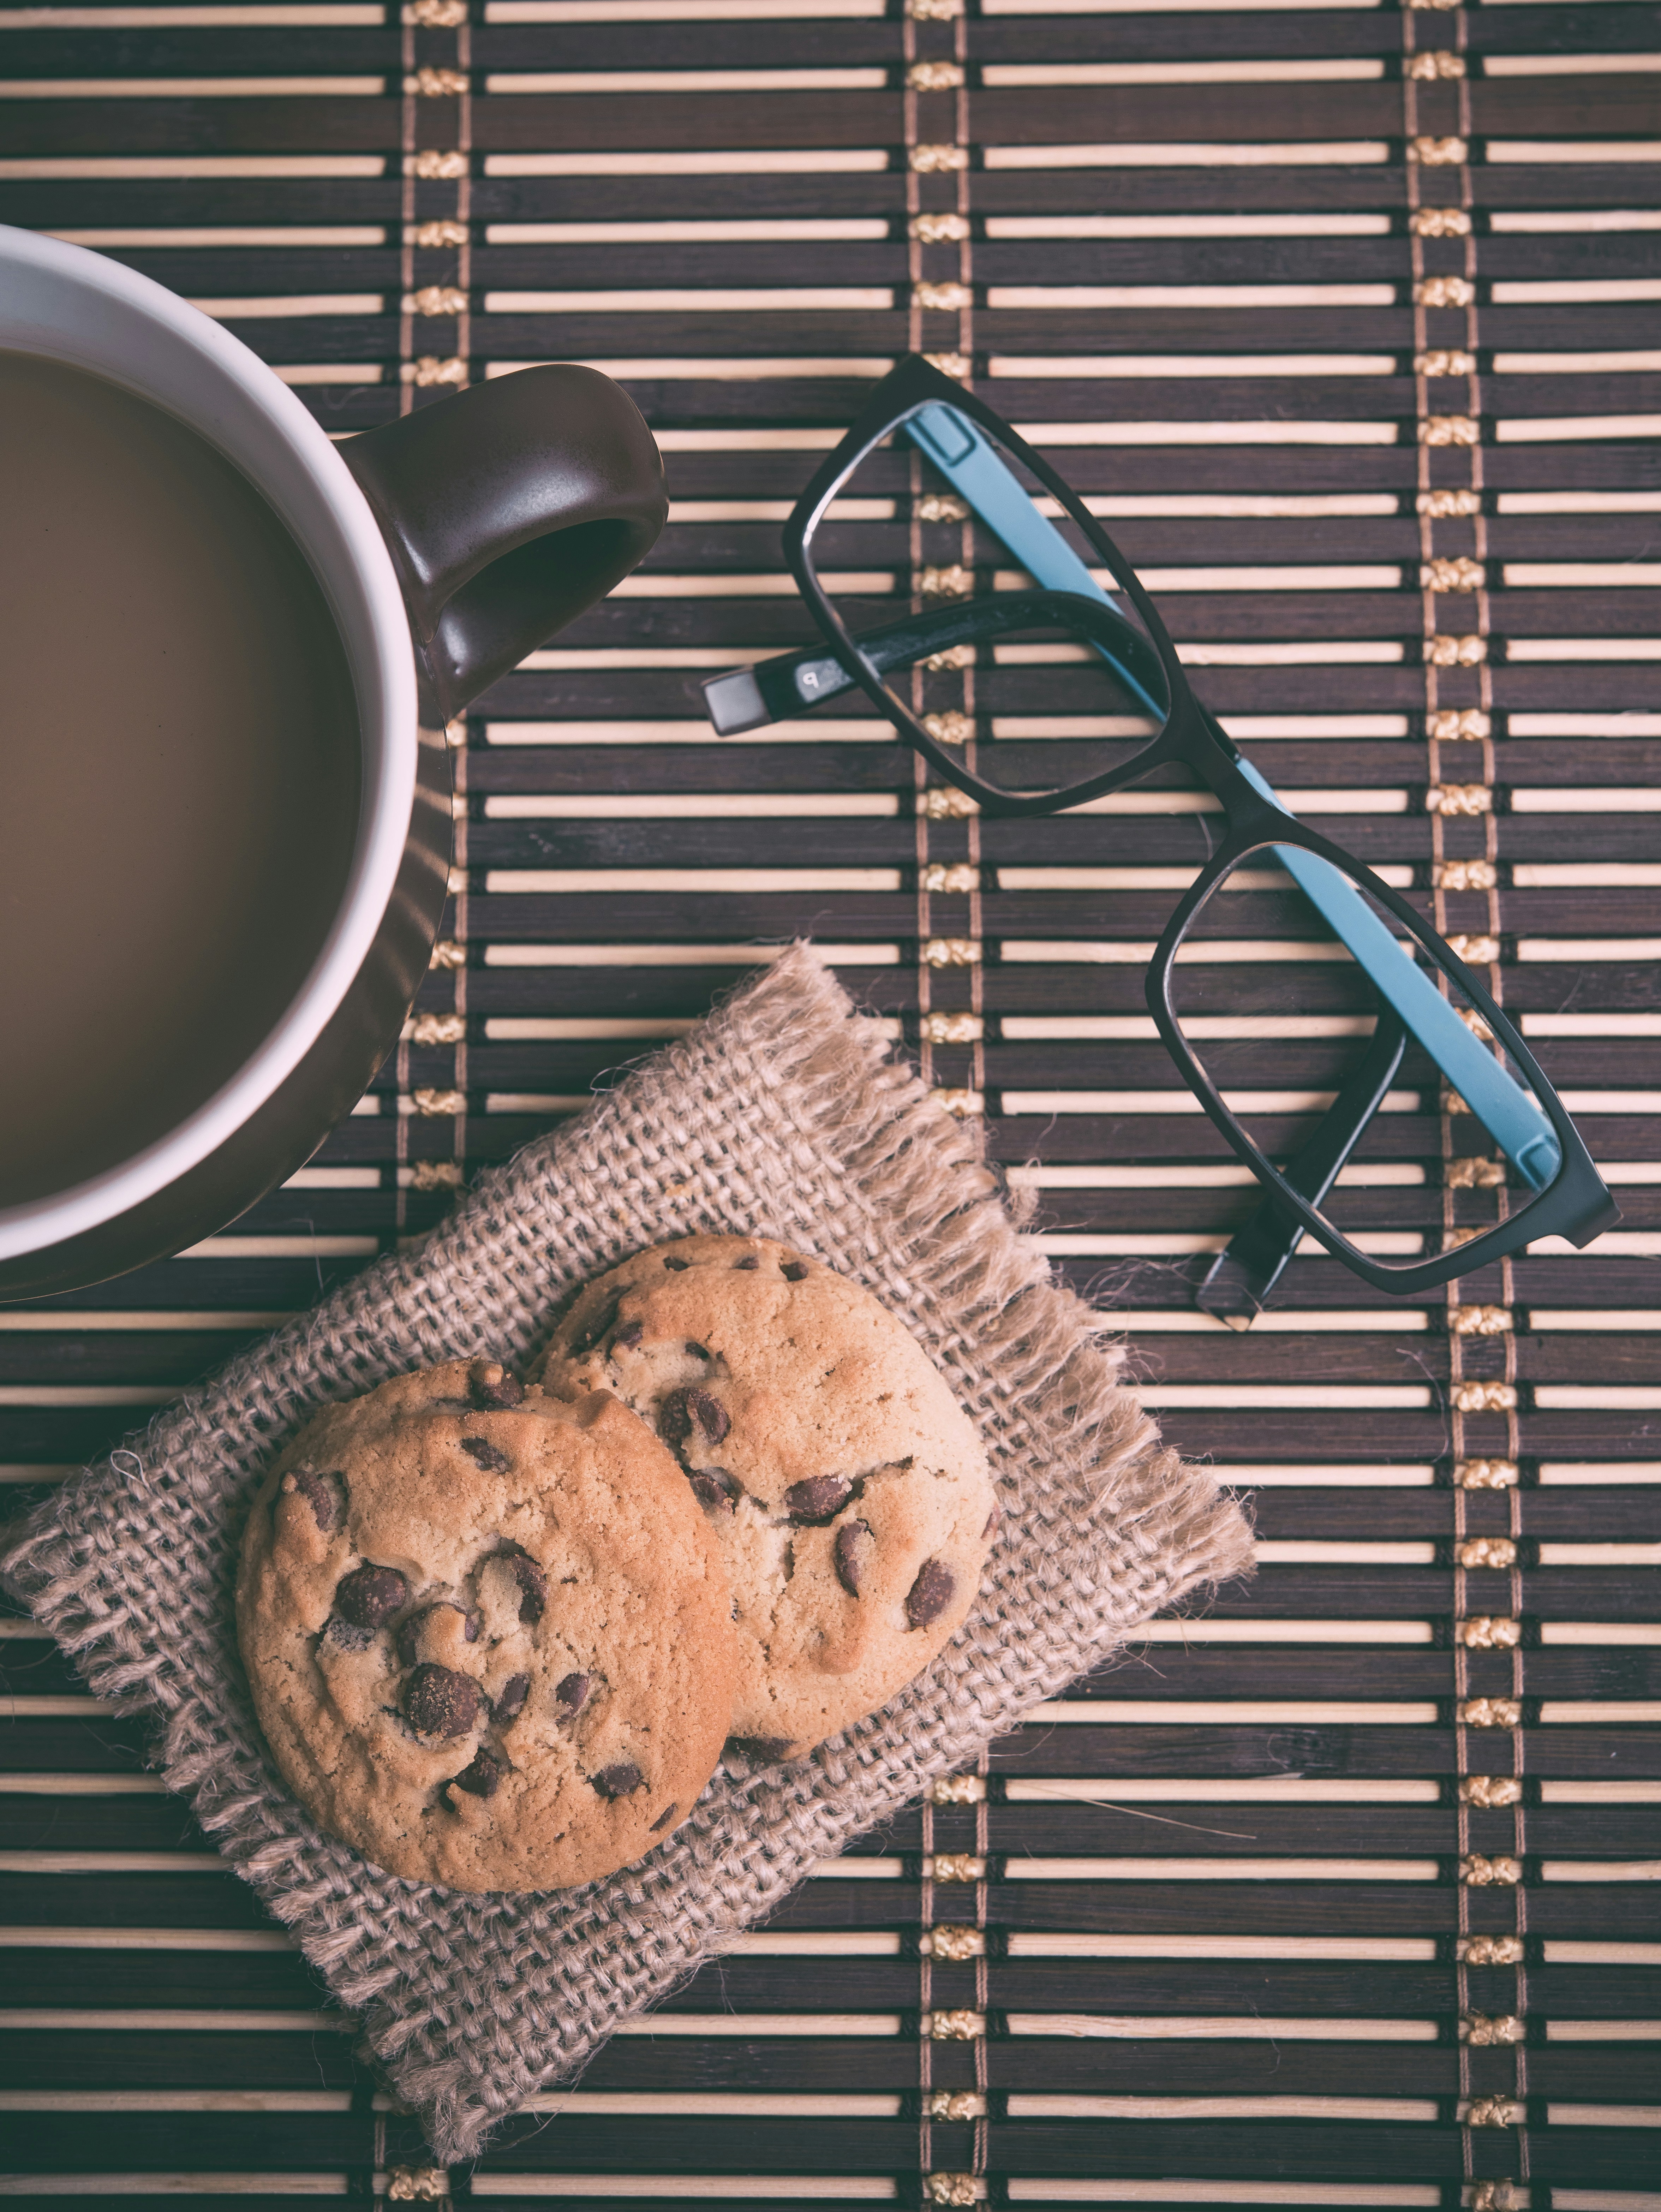 Cookies, coffee and glasses